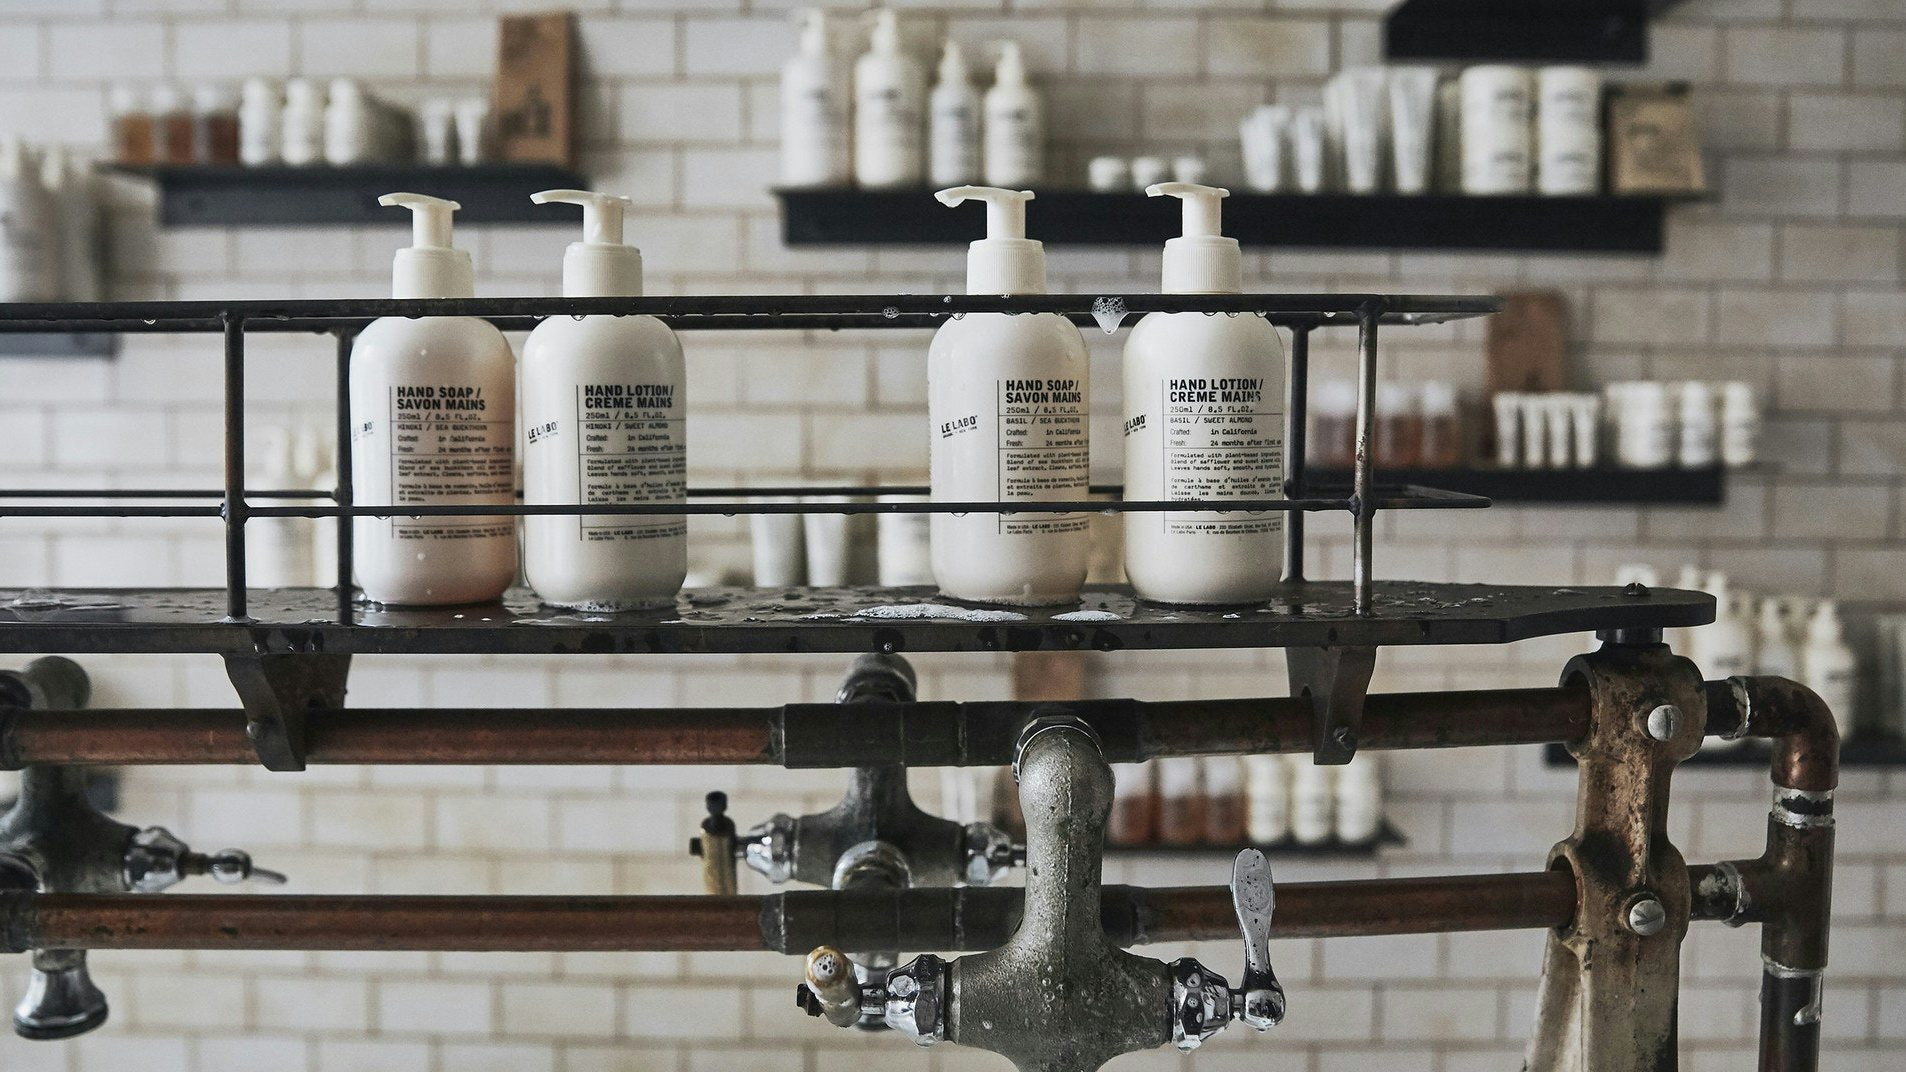 China’s fragrance market is predicted to grow three times faster than the global market. So brands wanting to enter this market should act now. Photo: Le Labo Fragrances